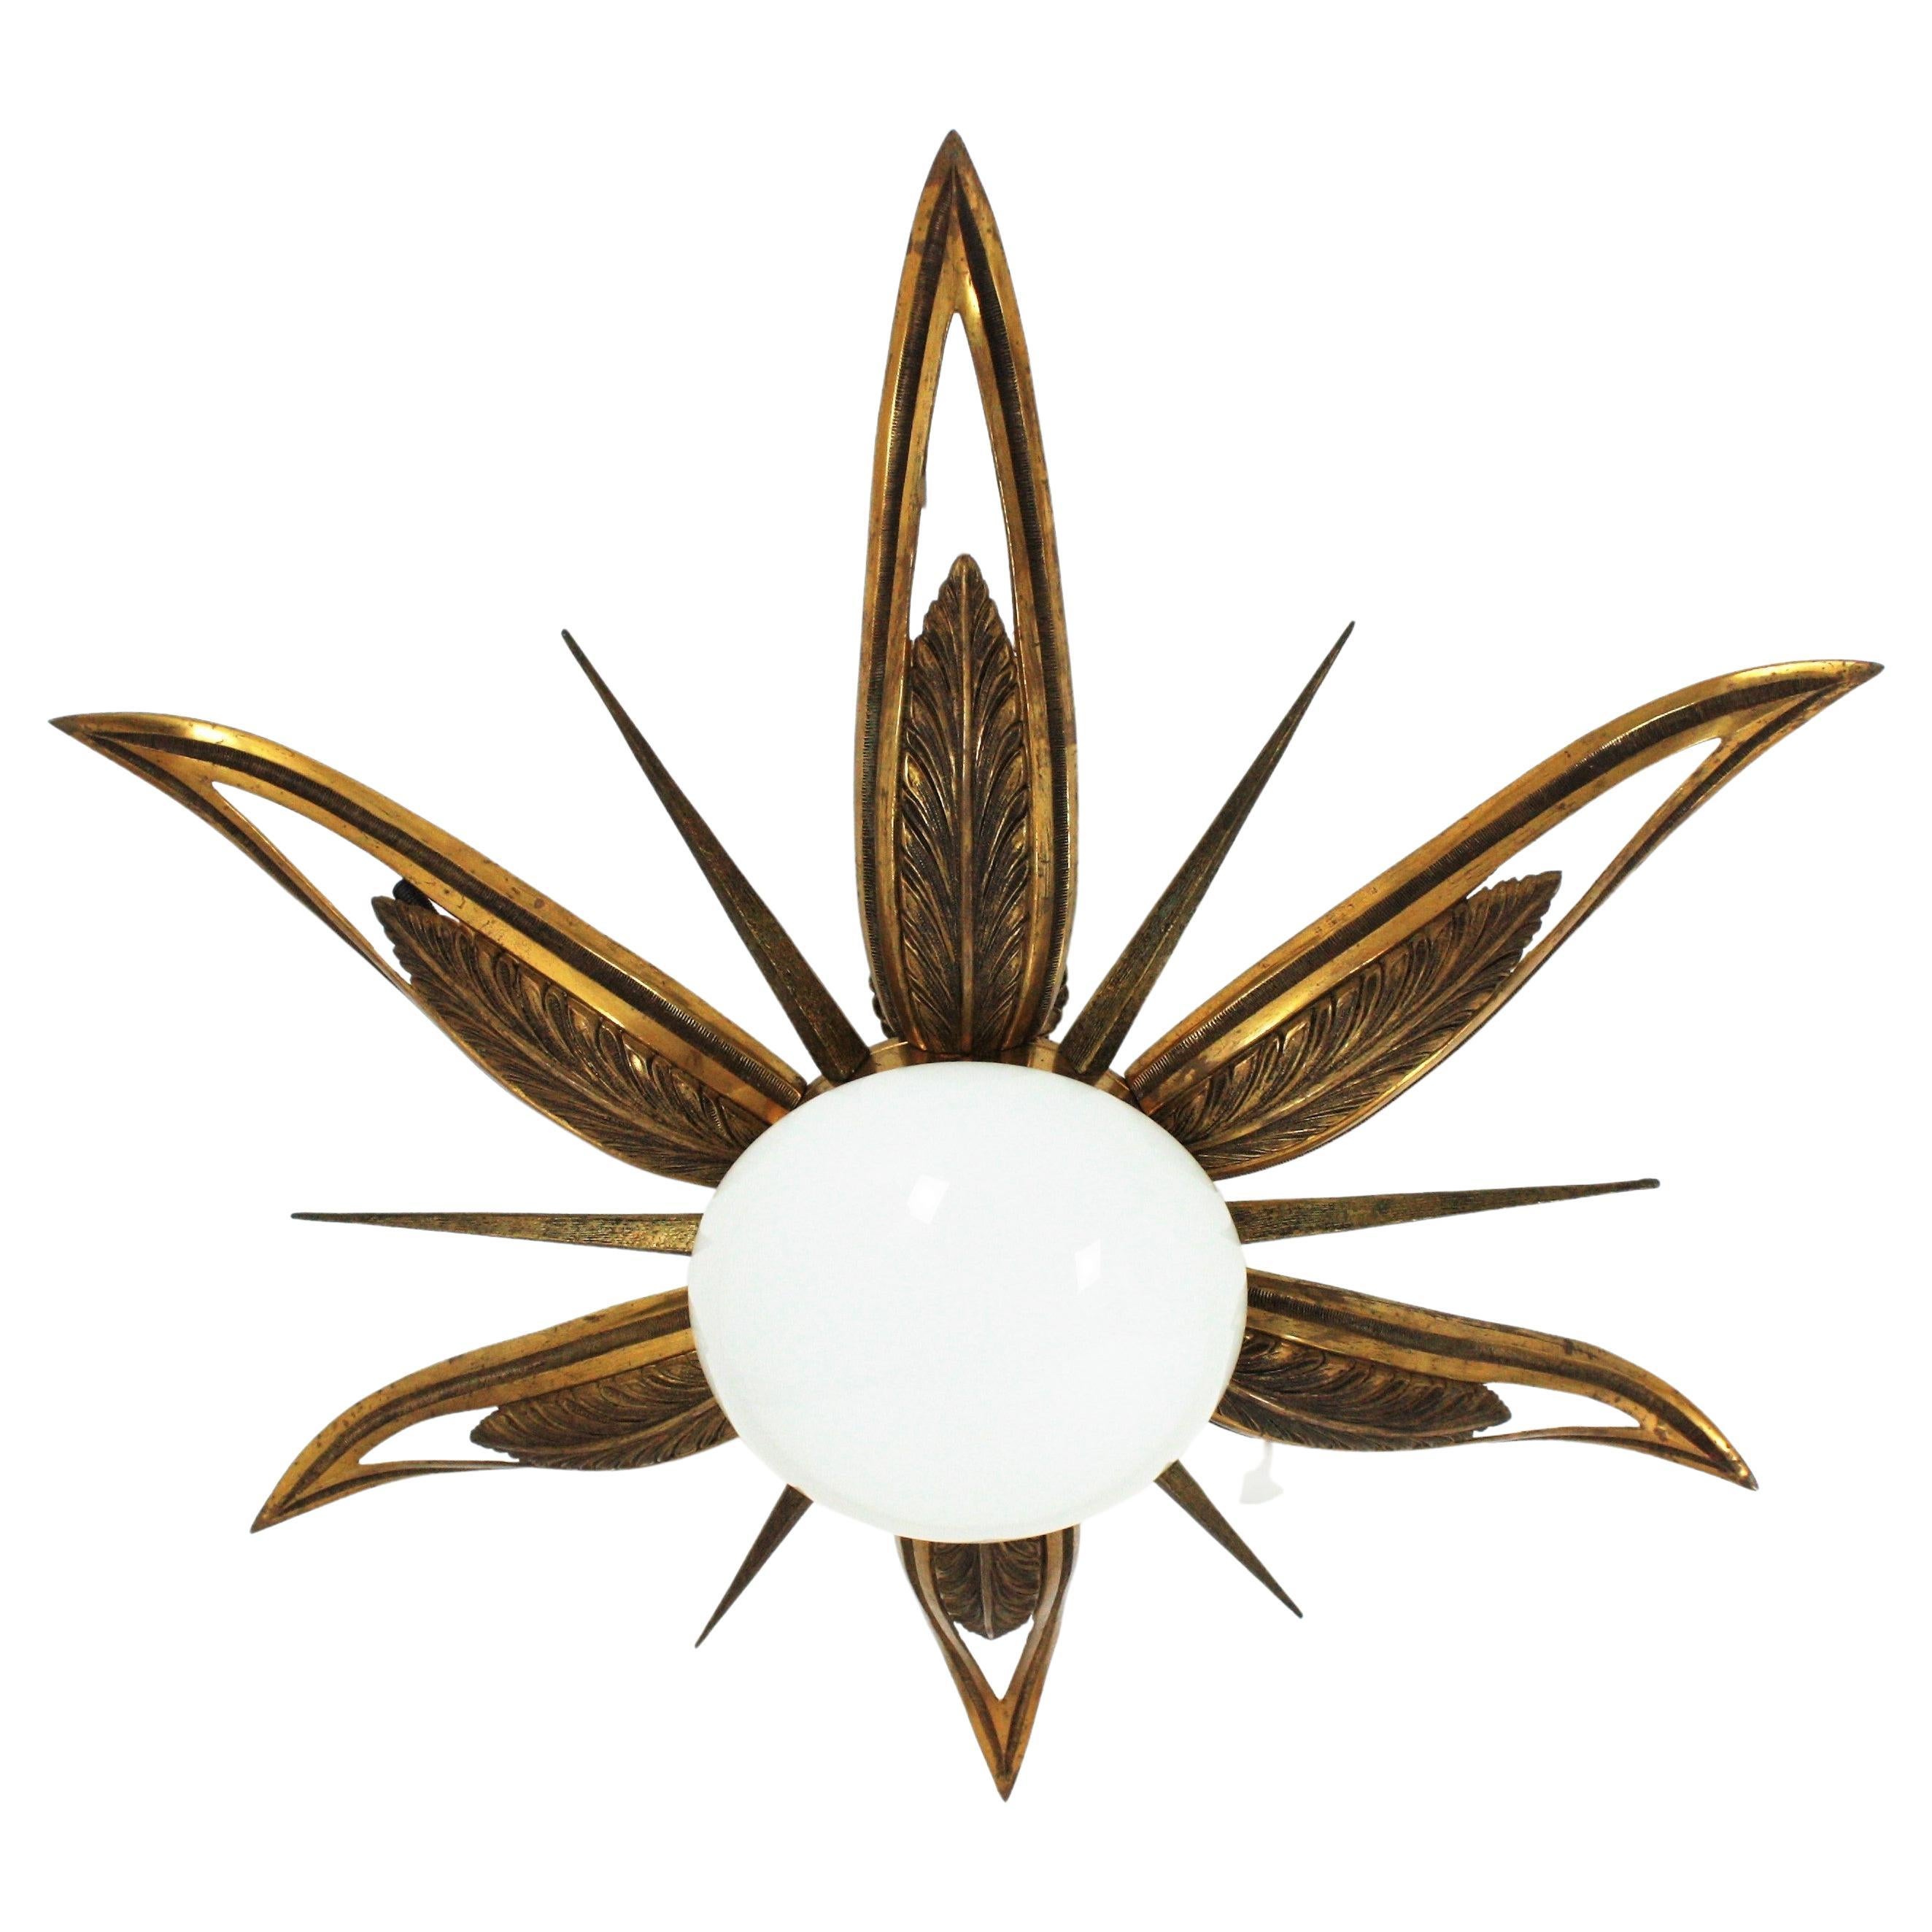 An exceptional Art Deco starburst shaped engraved and molded bronze ceiling lamp, France, 1930s.
This flush mount features a flower burst or starburst with 6 large leaves or rays, 6 pointed smaller and thinner rays and an opaline white glass